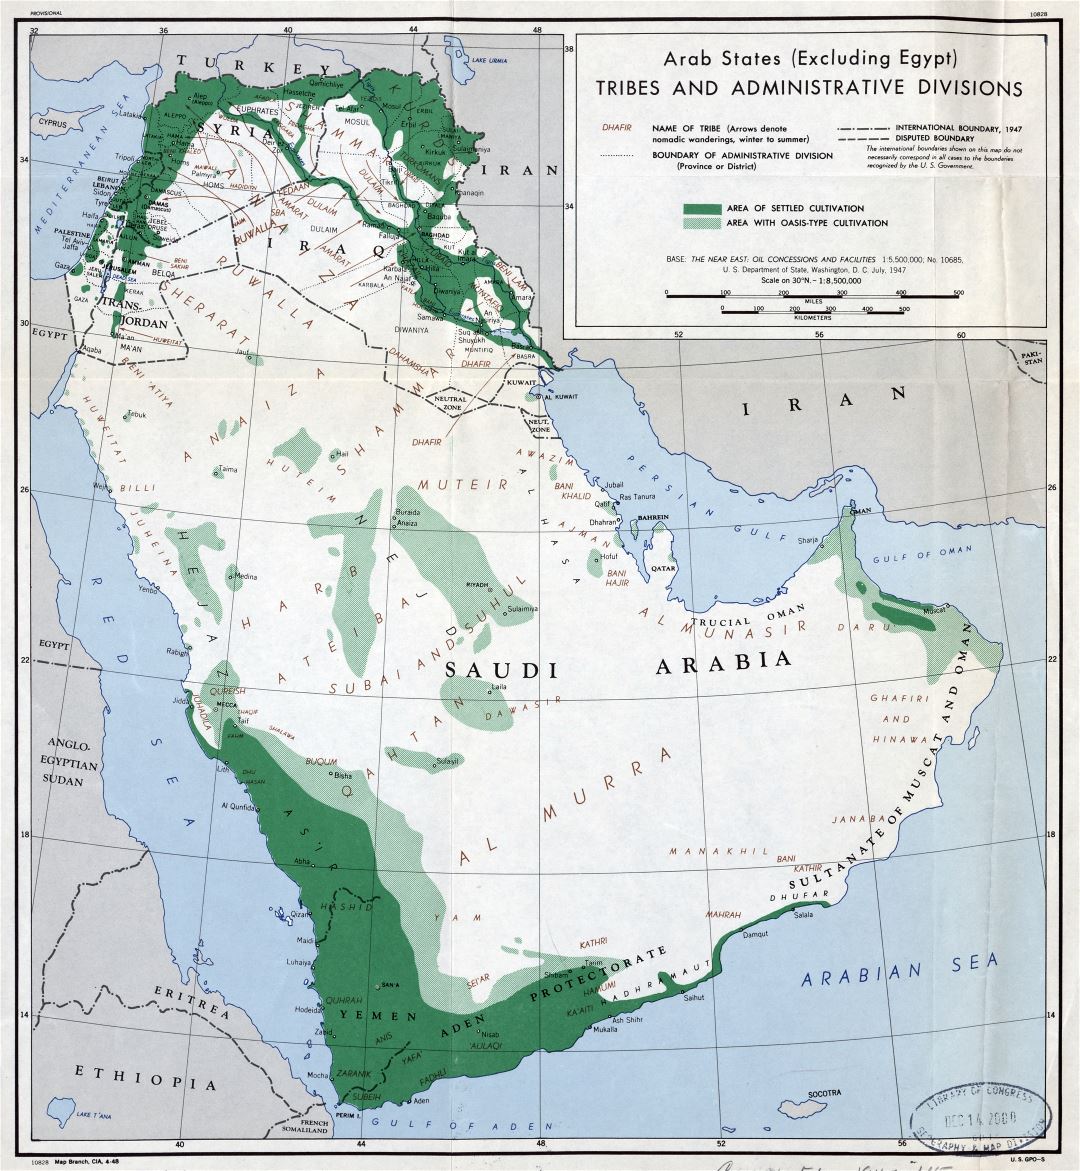 Large detailed Arab States (Excluding Egypt) tribes and administrative divisions map - 1947